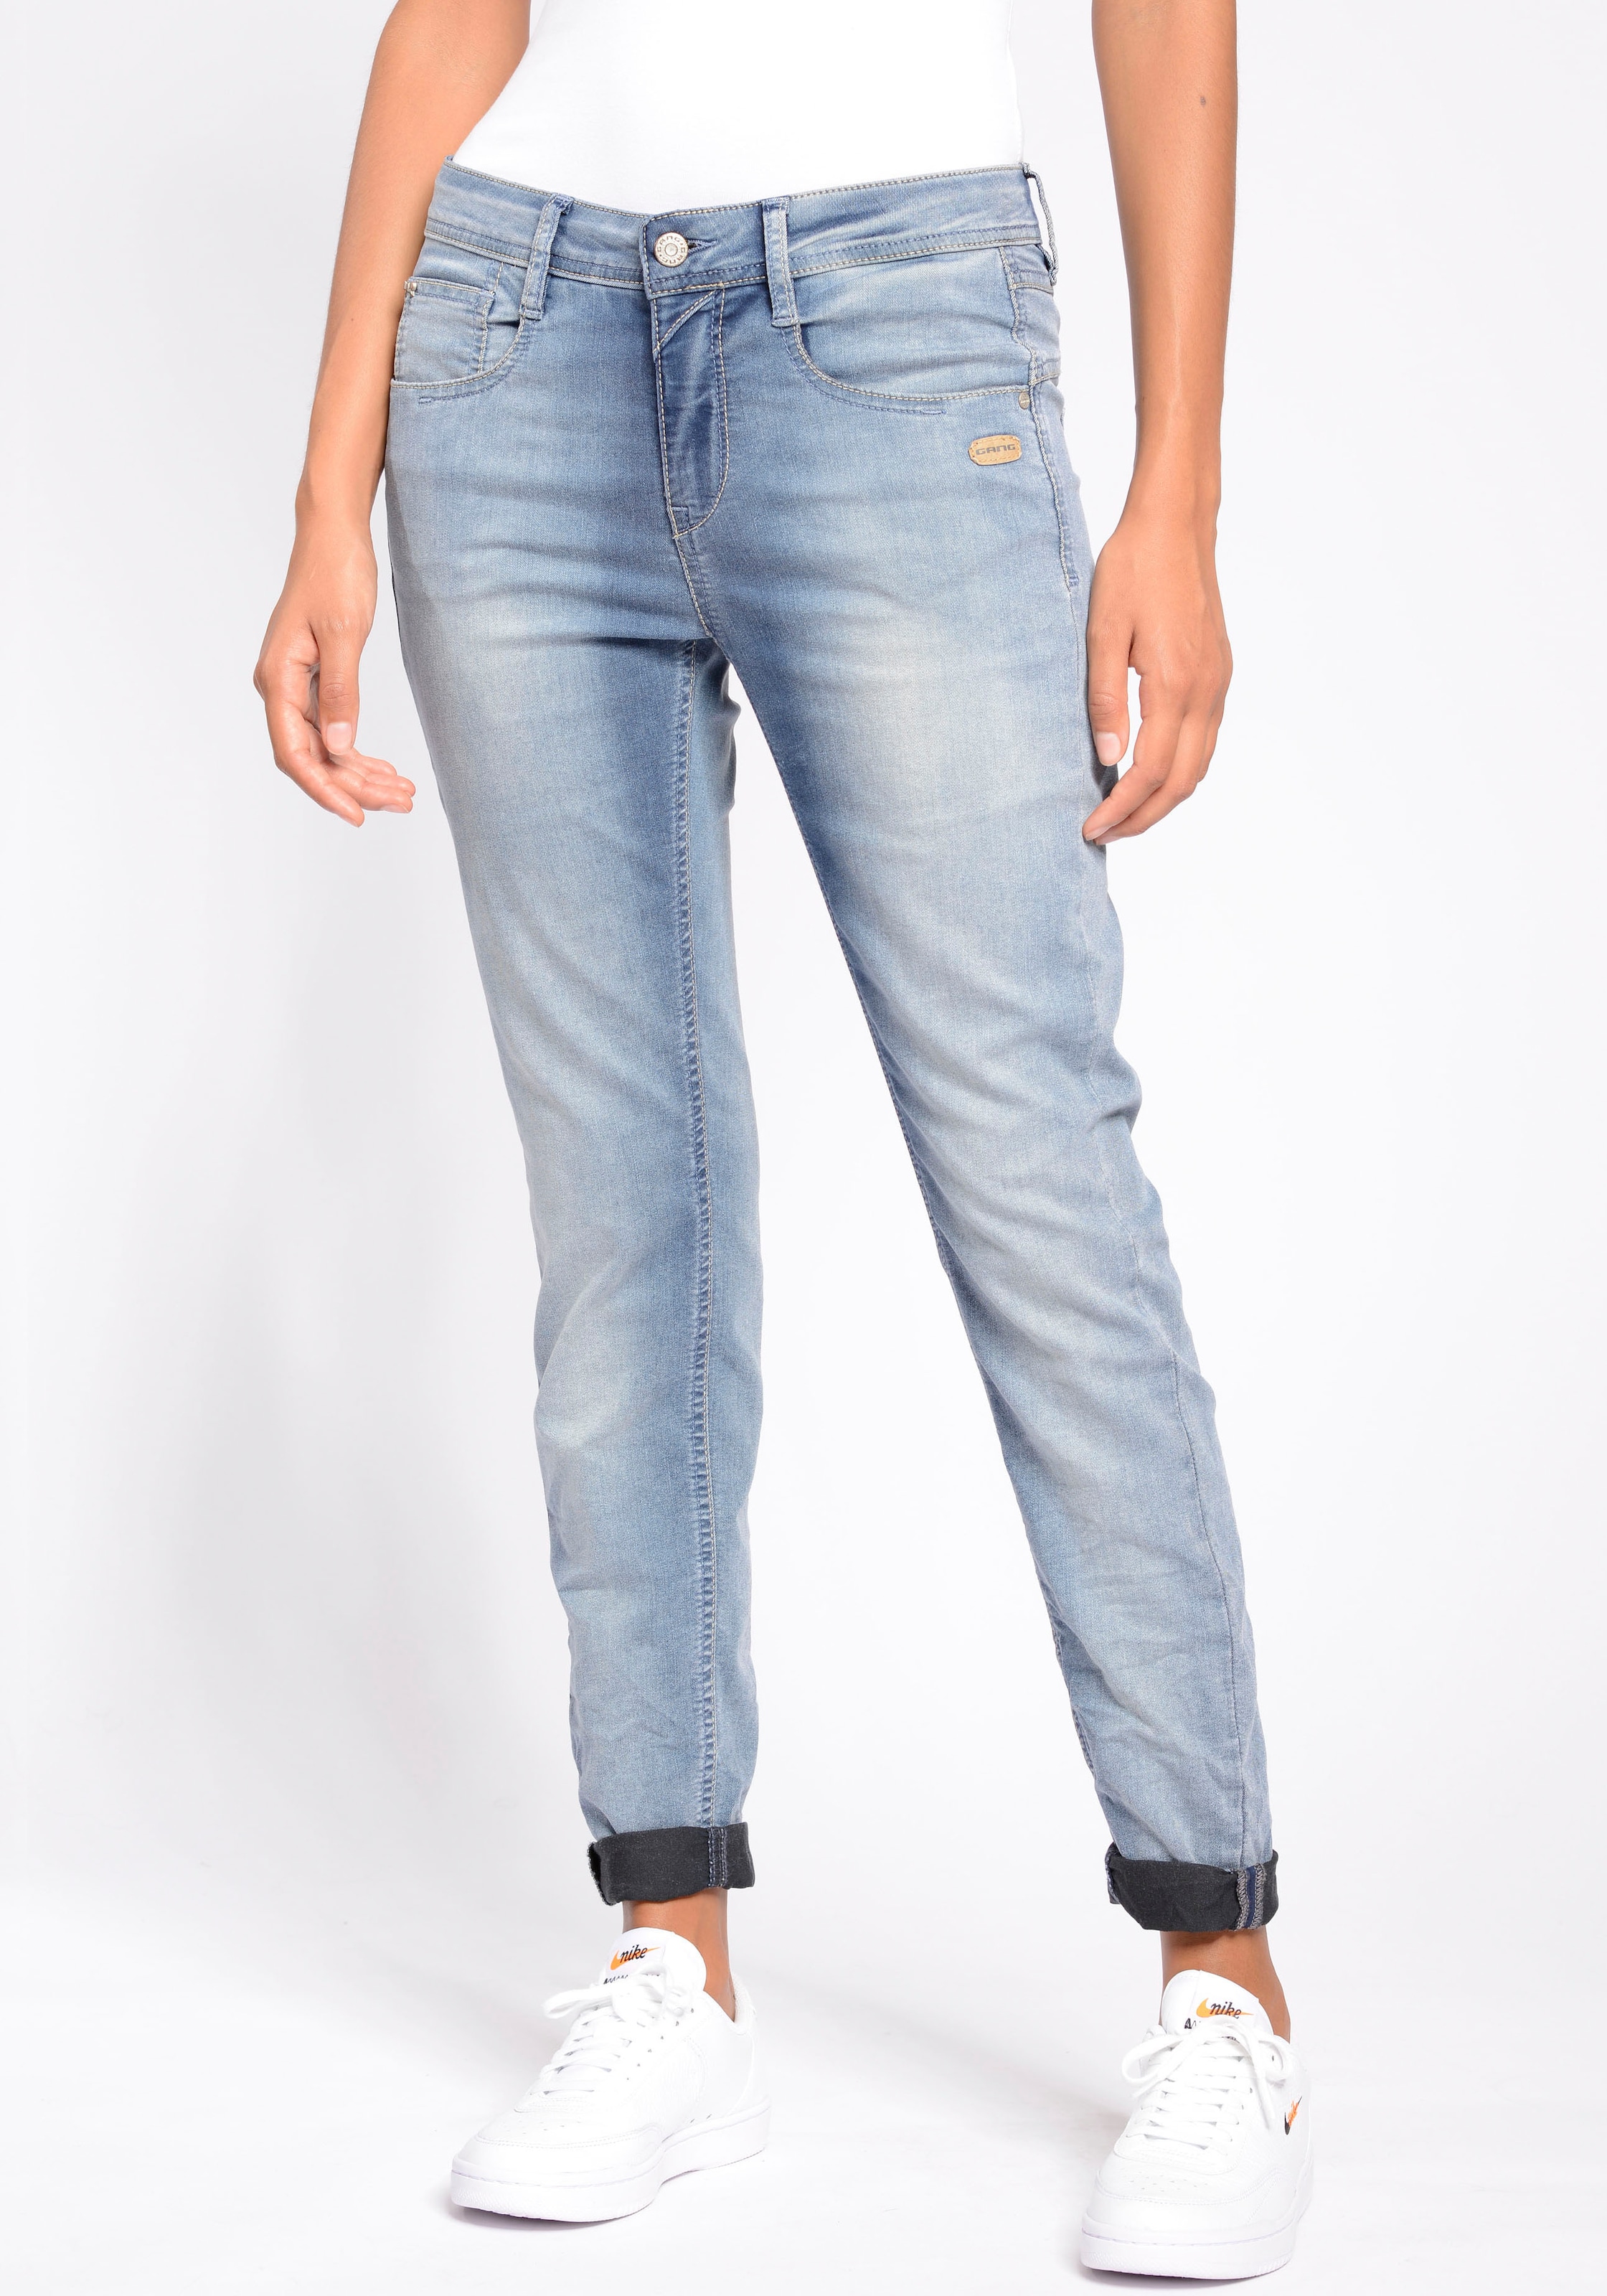 Waschung bei Relax-fit-Jeans GANG in cooler »94Amelie«, OTTO online Used